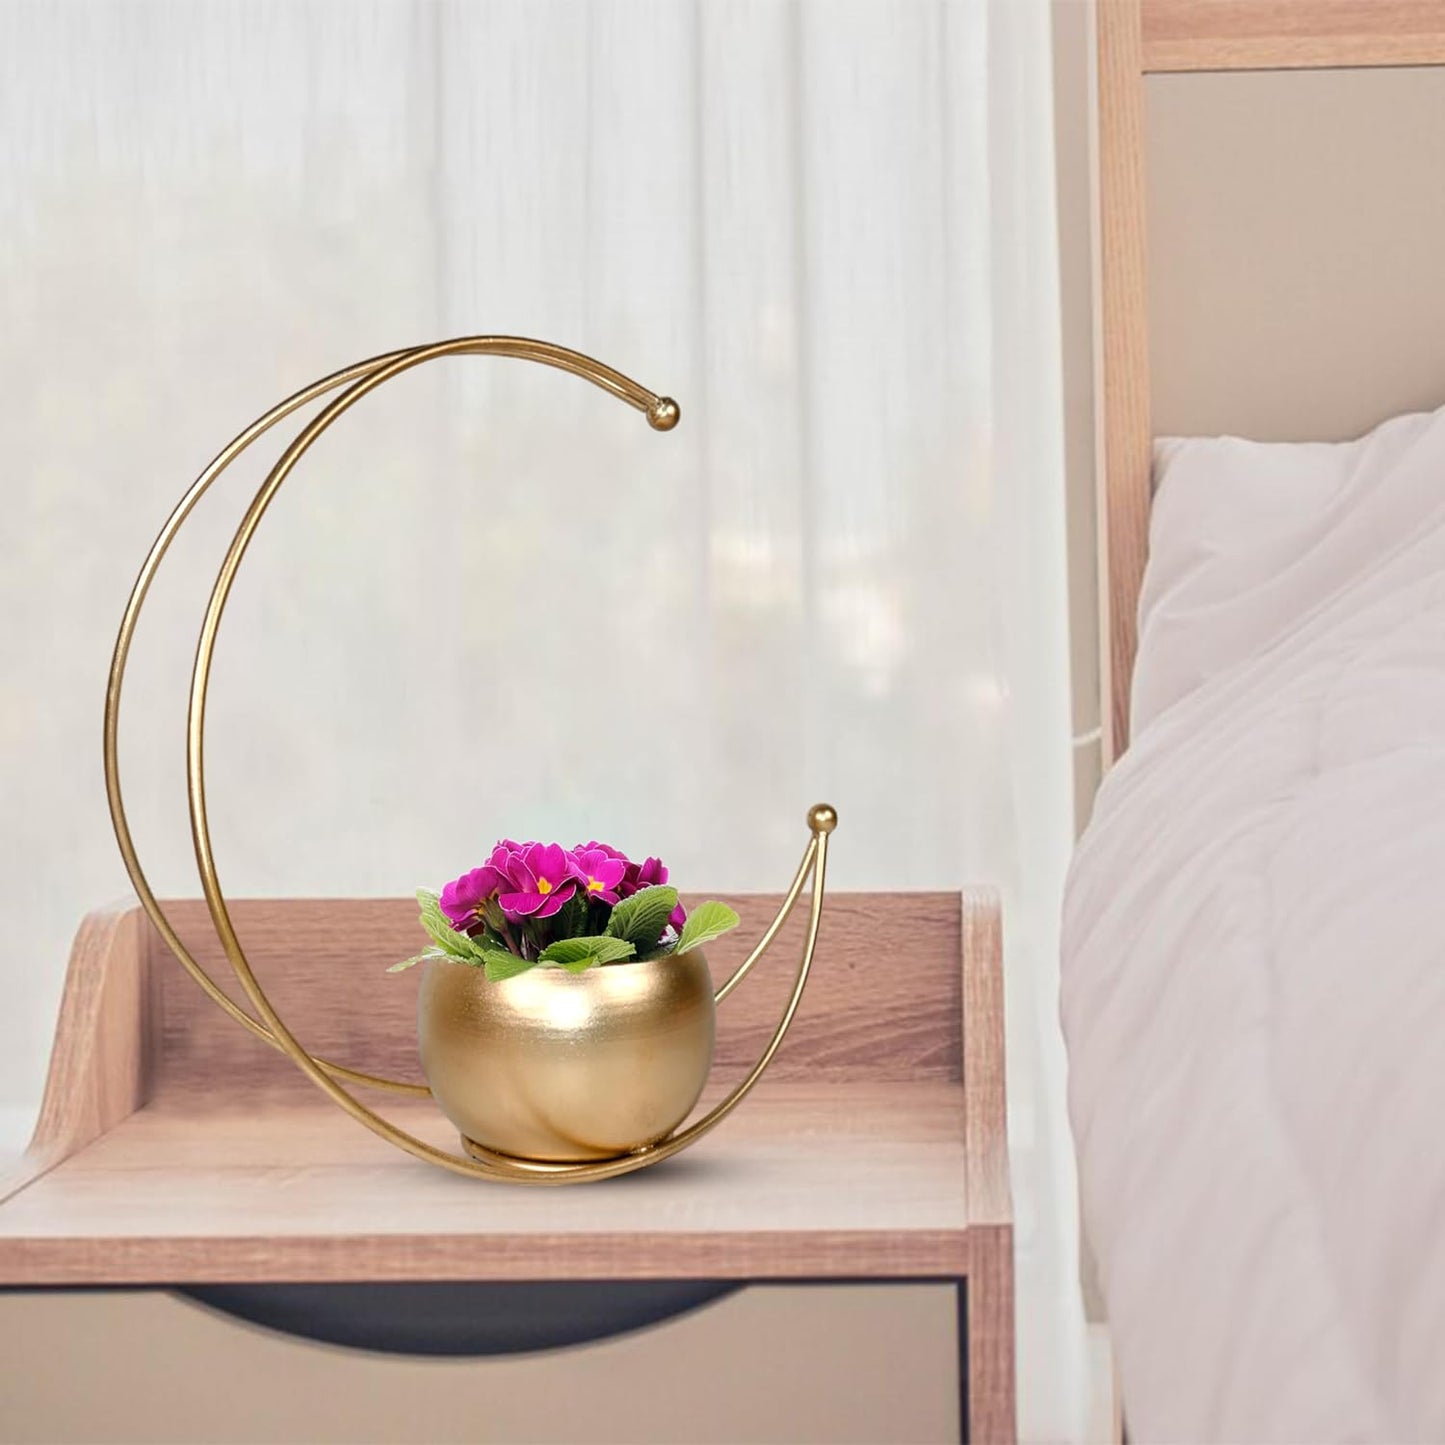 Metal Flower Vase with Gold Finish | Geometric Half Moon Design Flower Pot Stand | Table Top Decorative Flower Pot | Gold Metal Flower Vase for Home and Office Side Table Decoration